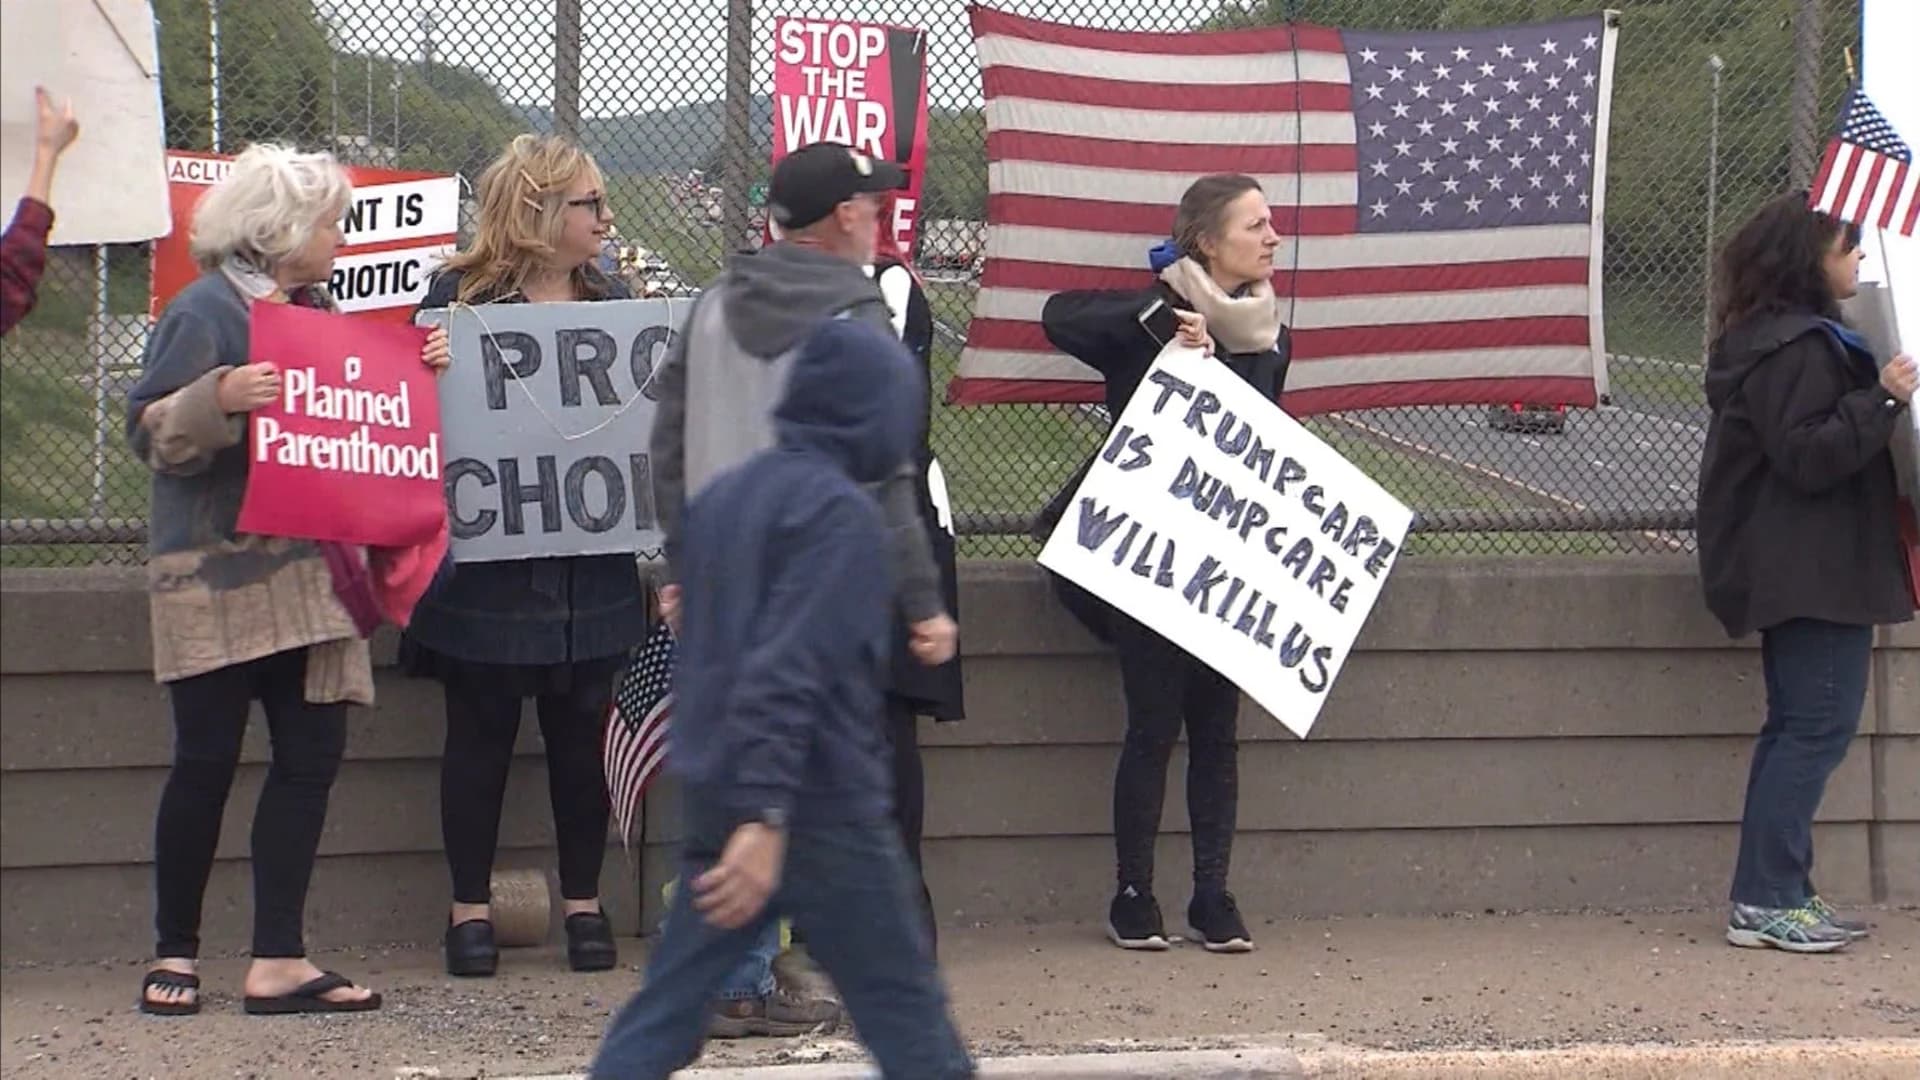 President Trump's possible visit to Bedminster sparks protests